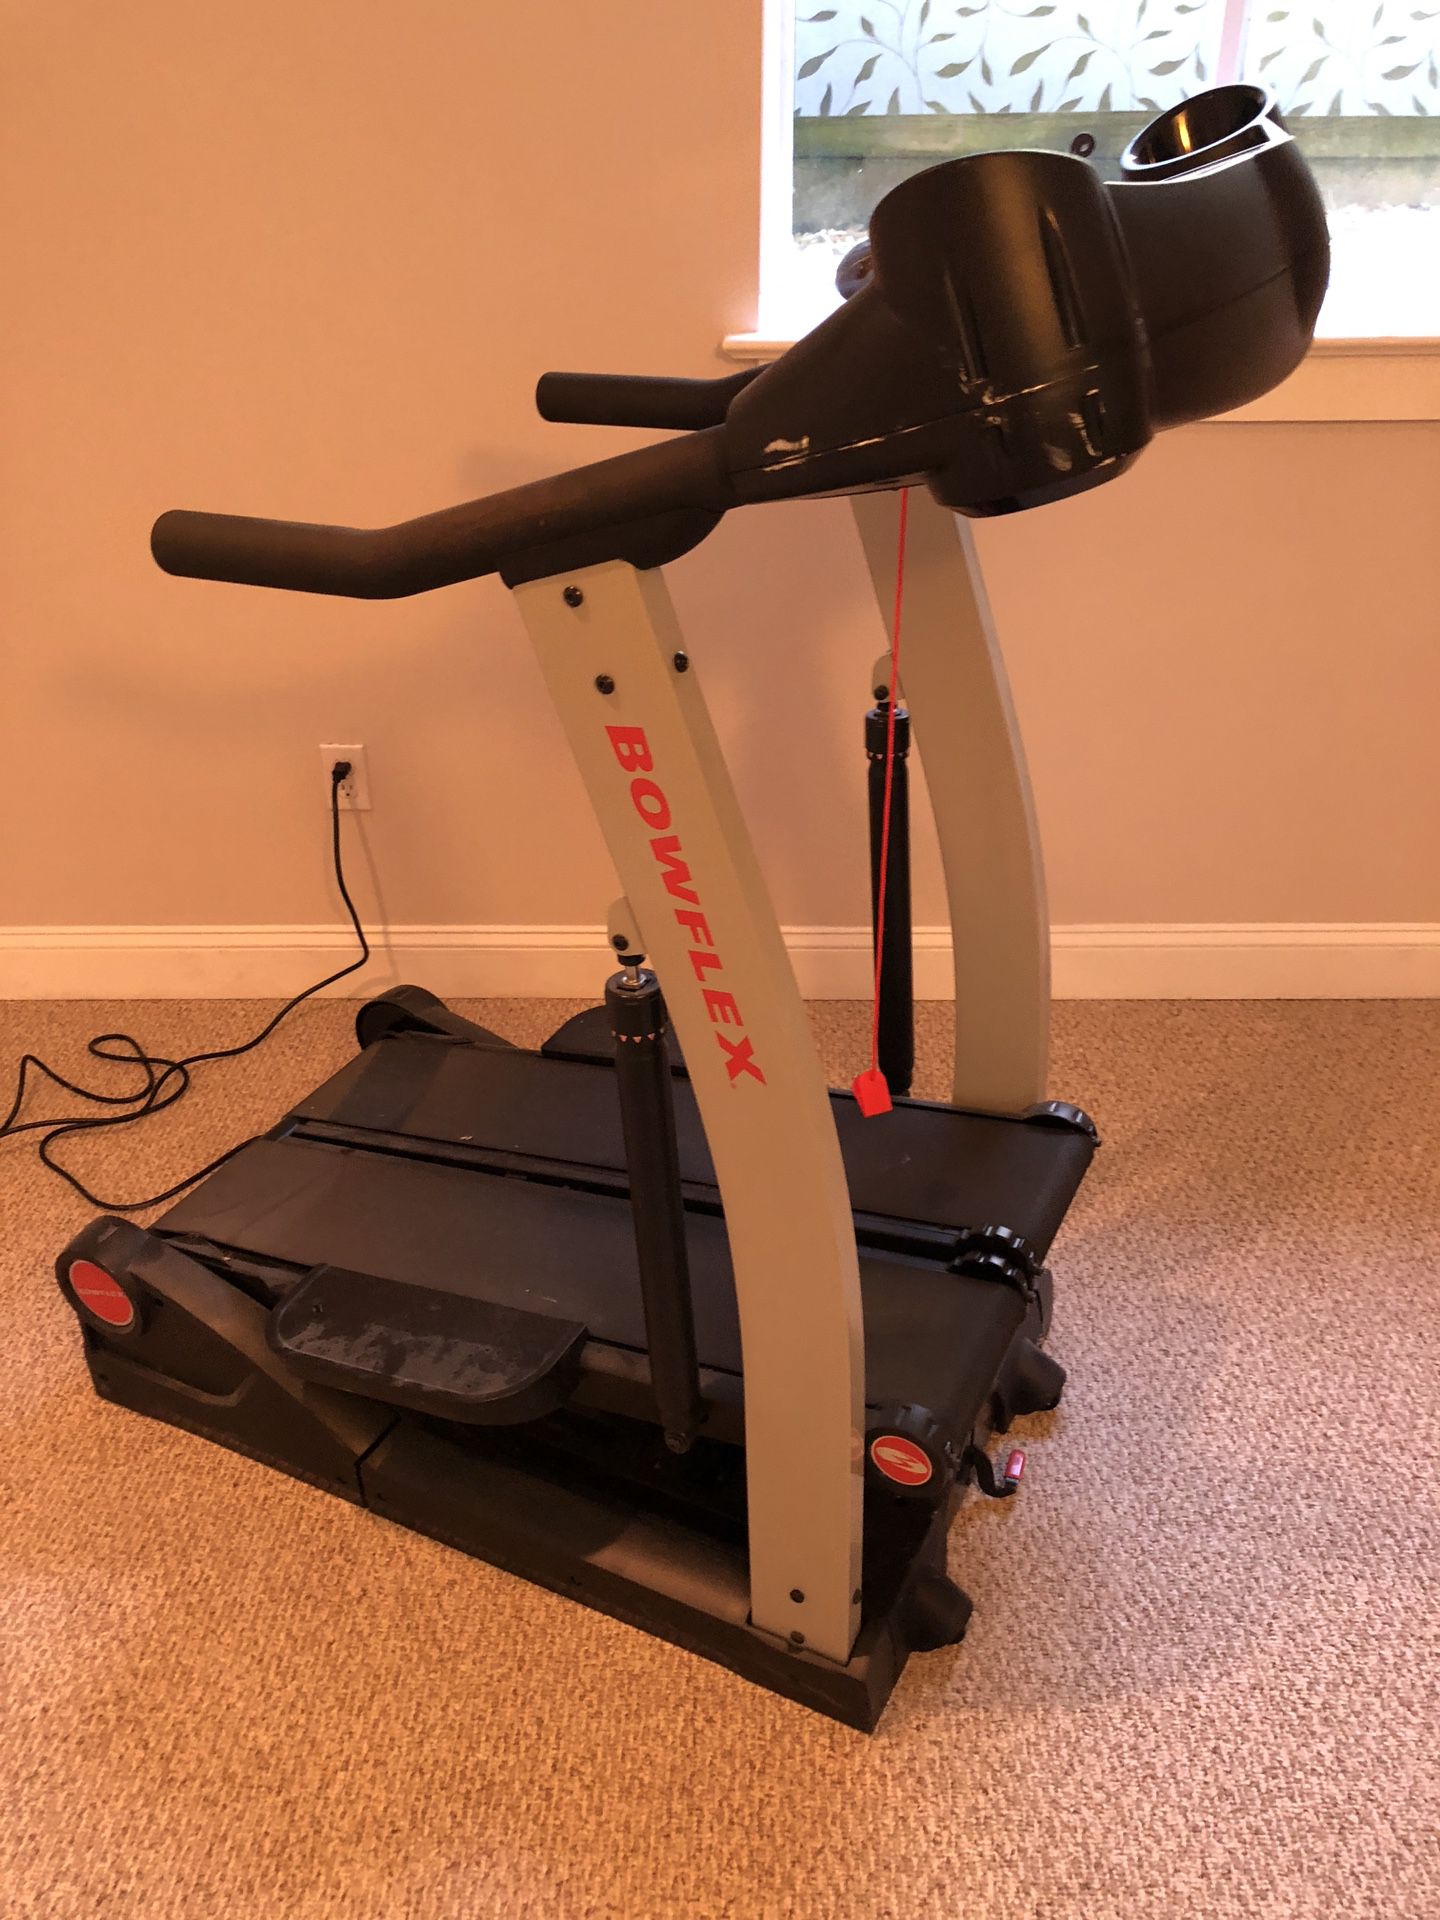 Looking for a good home Bowflex Treadclimber